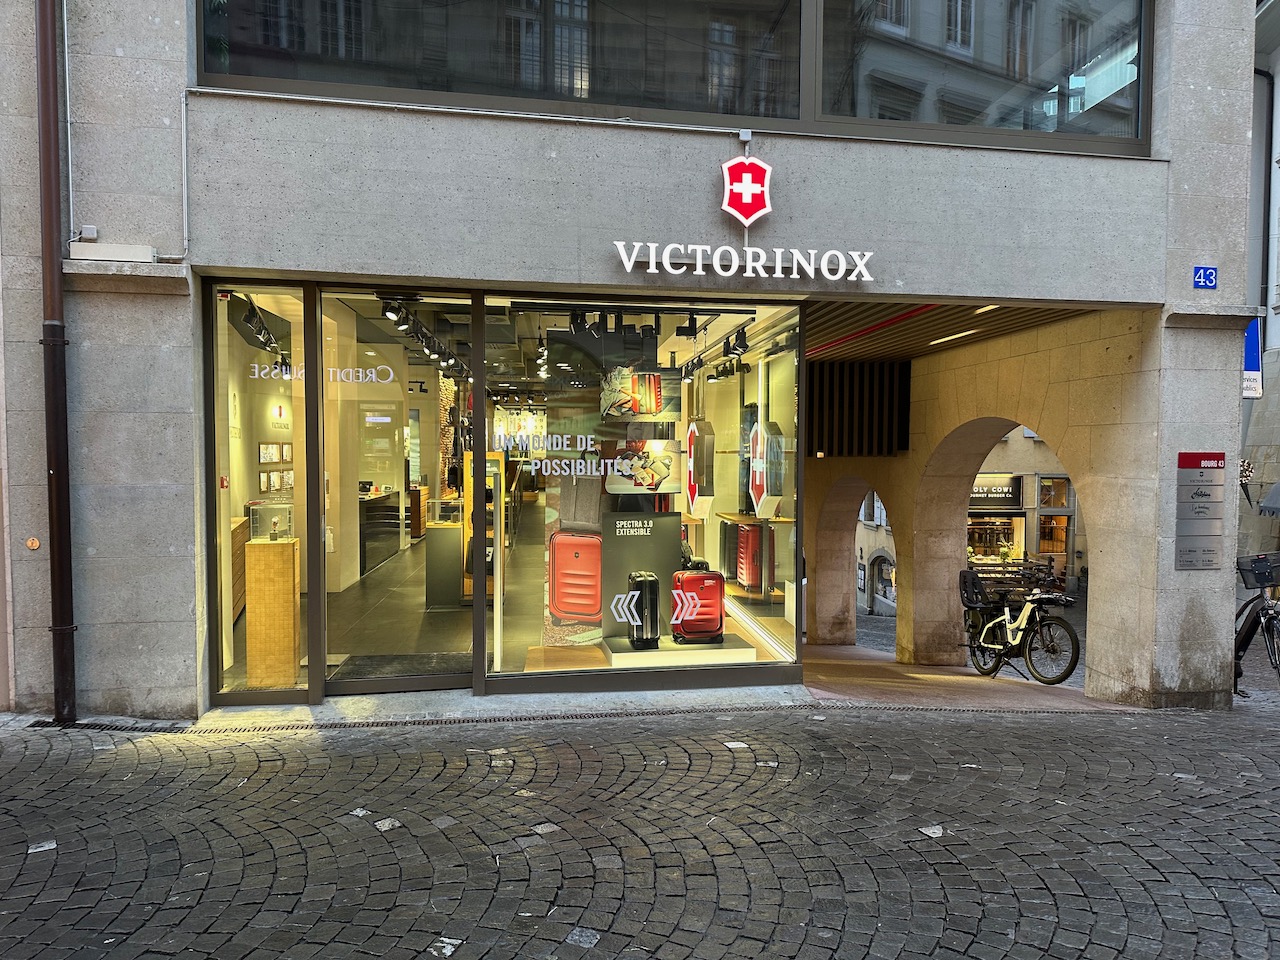 A Visit to the Victorinox Store in Lausanne